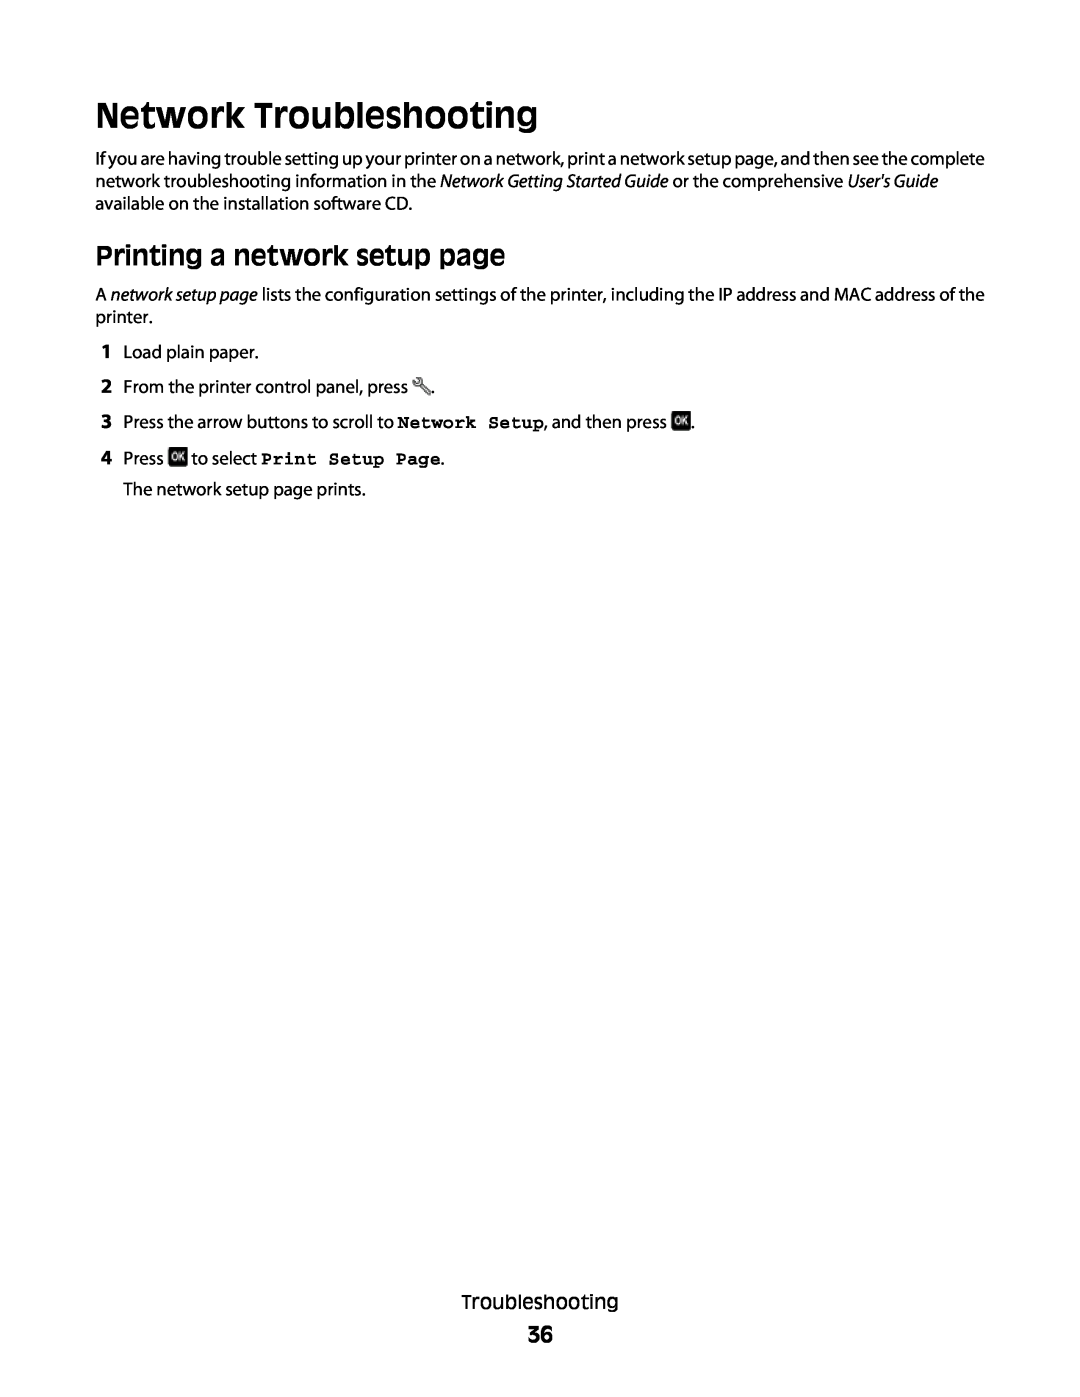 Lexmark S300 manual Network Troubleshooting, Printing a network setup page 